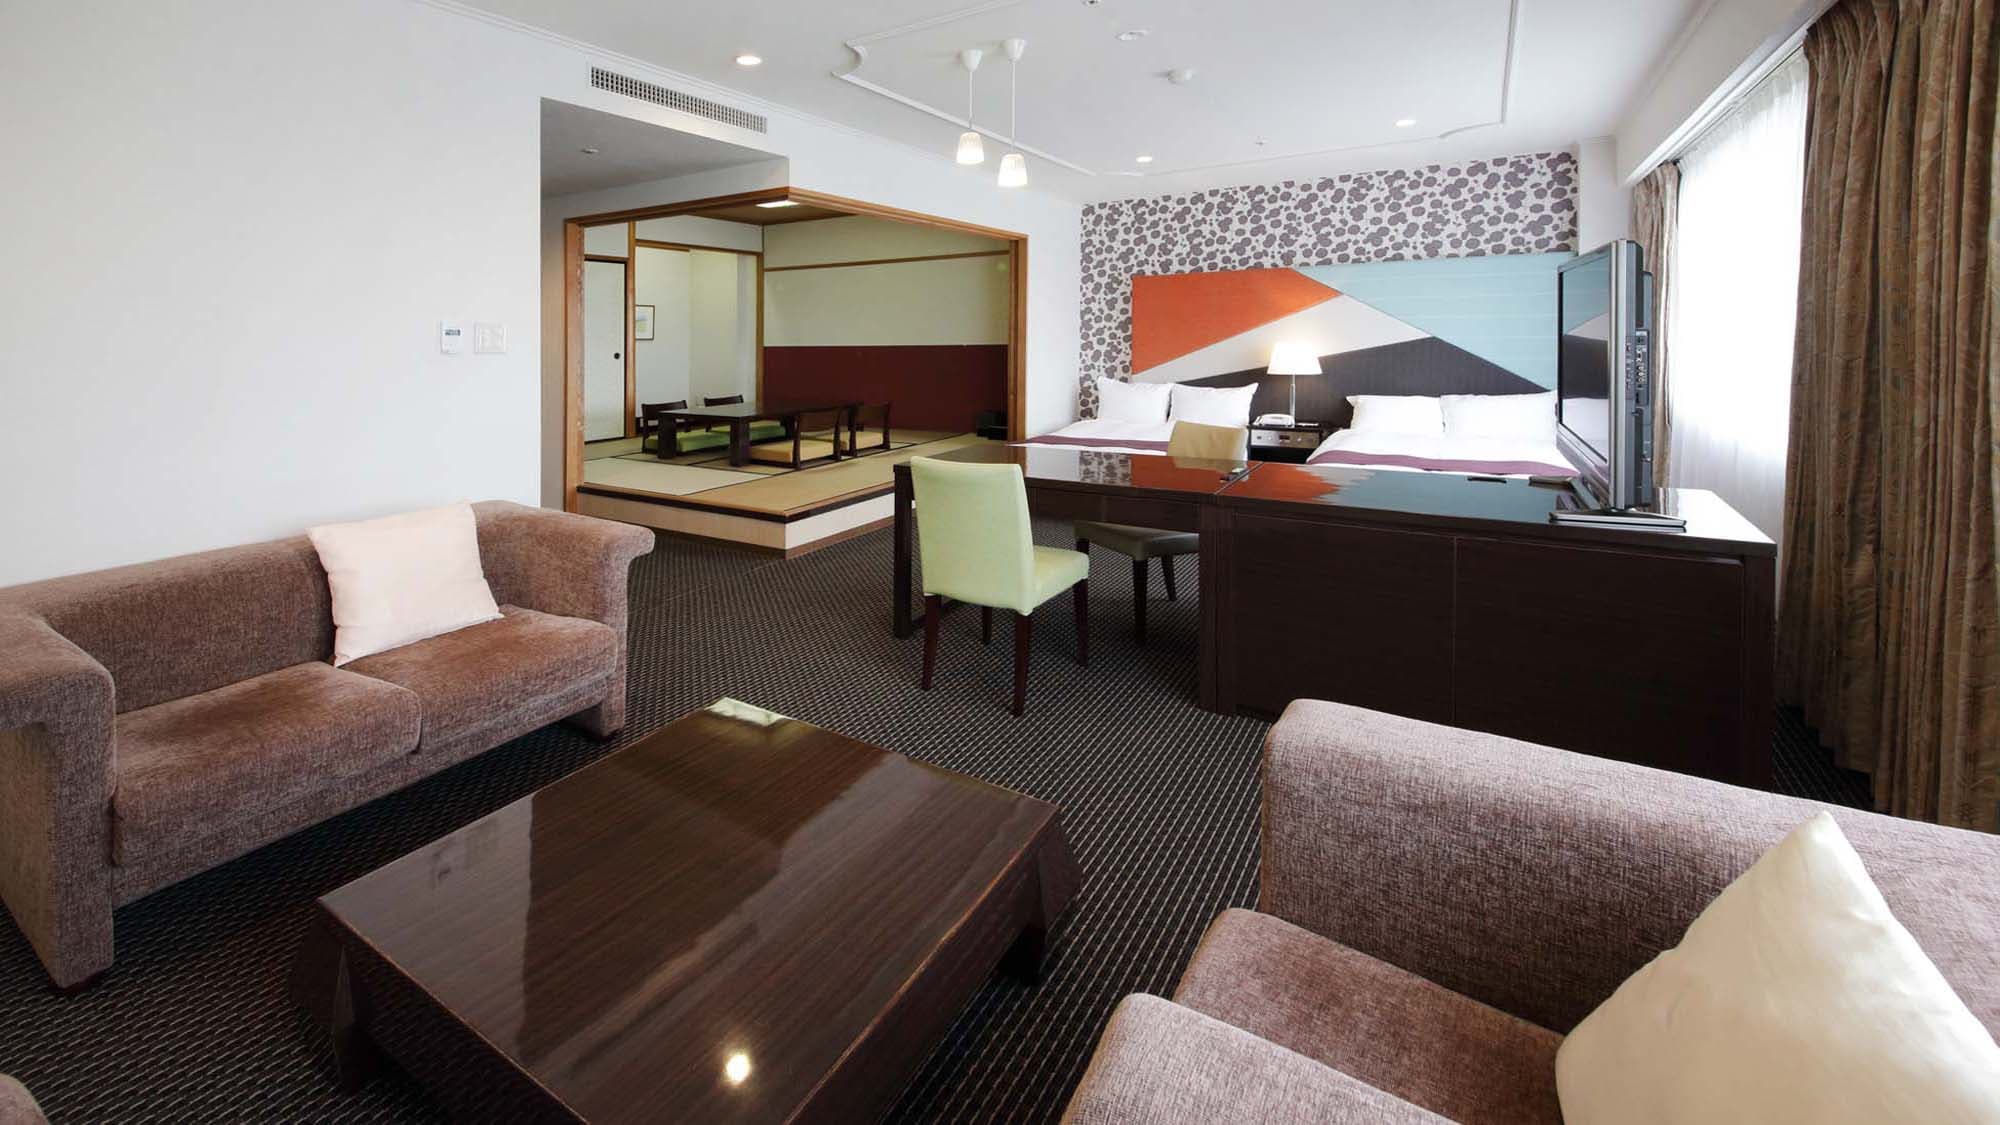 [Suite Room] A 72m2 suite that combines a twin room with a Japanese-style room with 8 tatami mats.